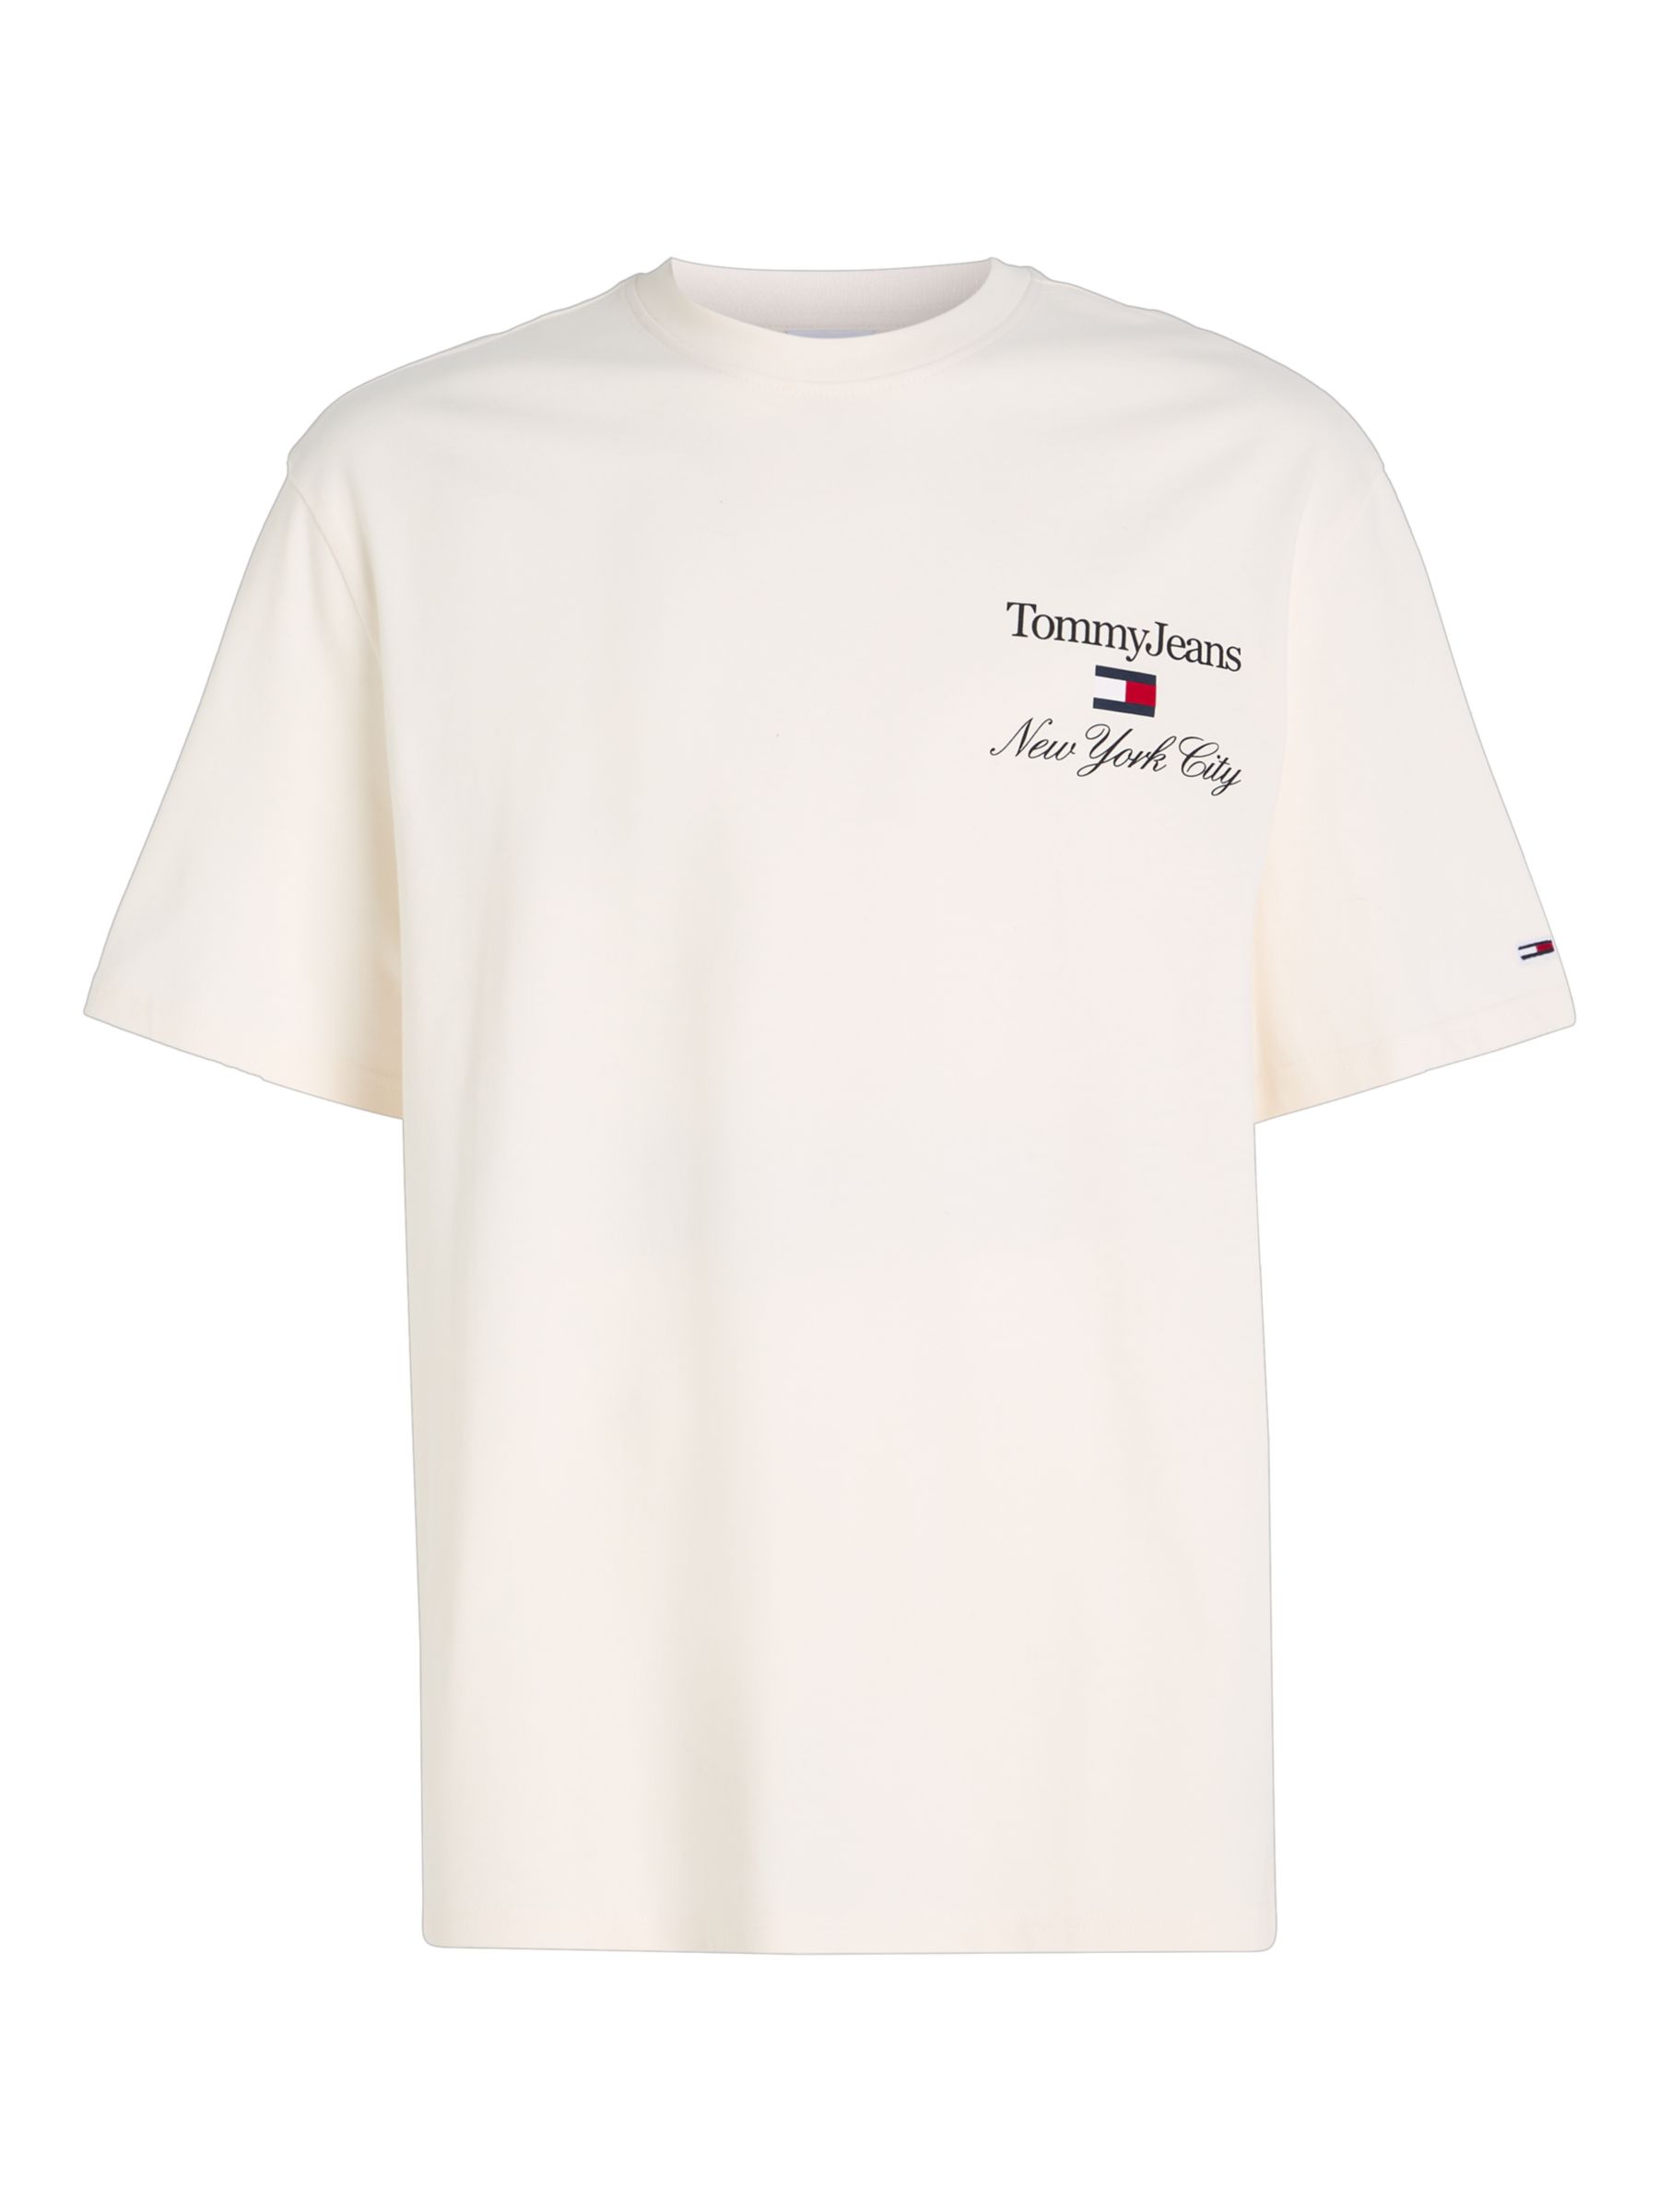 Tommy Jeans Athletic Relaxed T-Shirt, White at John Lewis & Partners